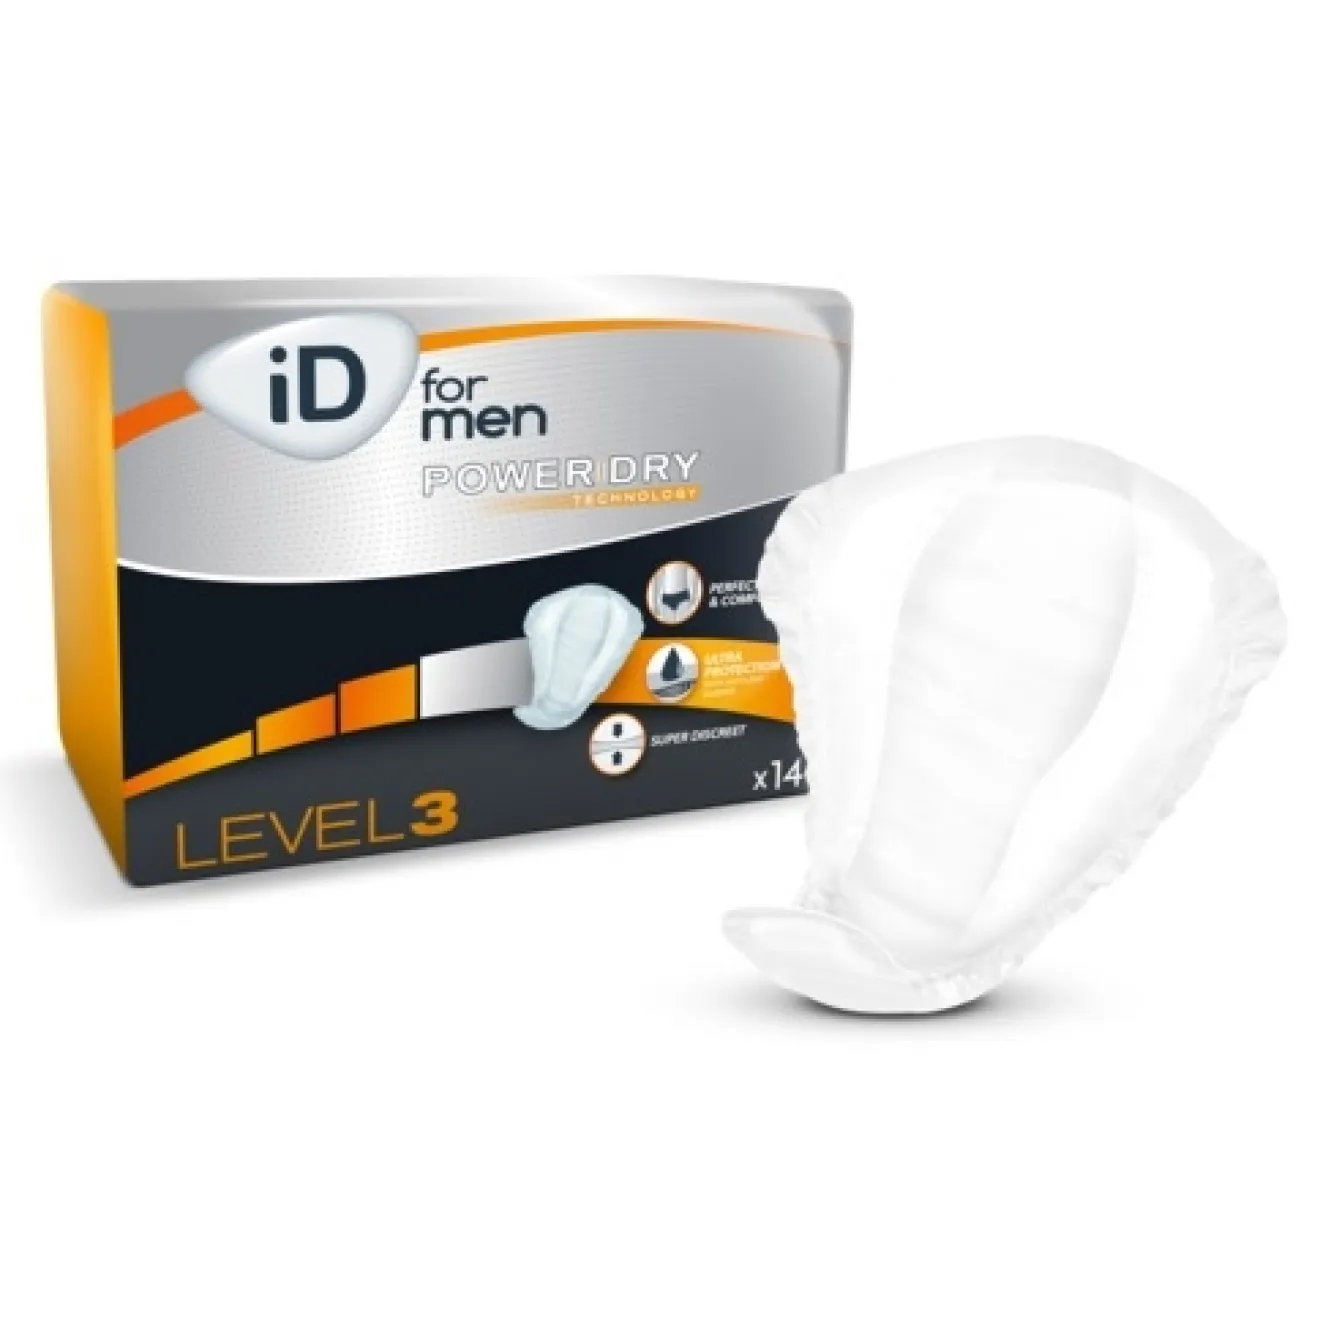 ID for Men Level 3 12x14 ST